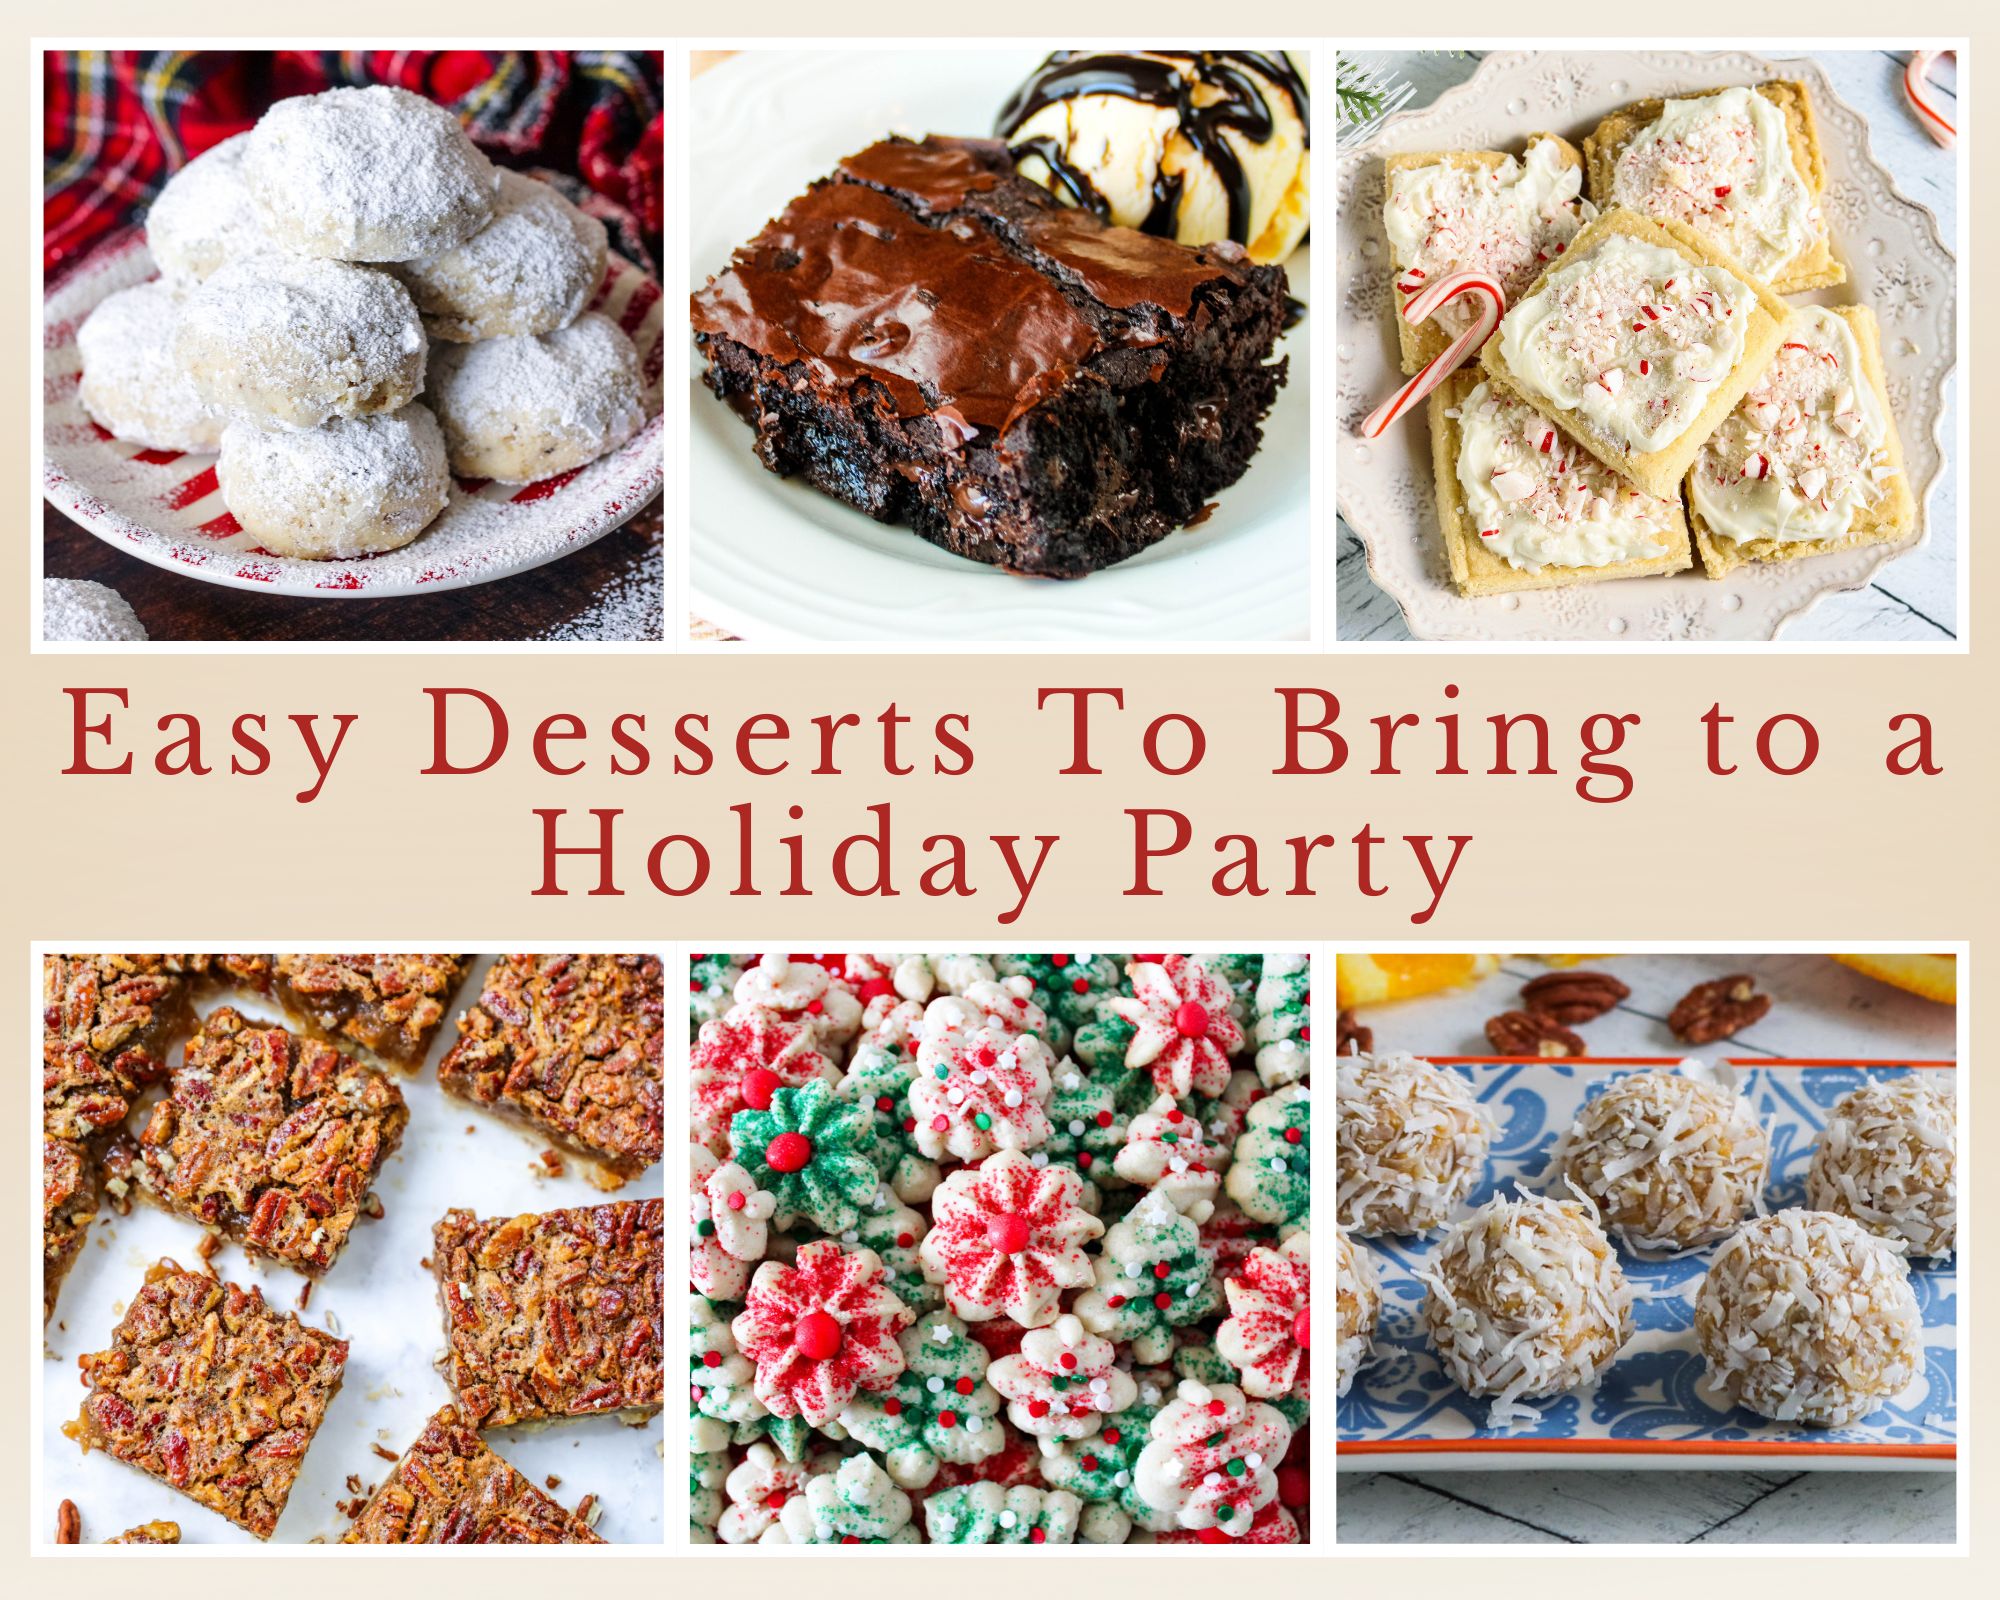 Easy Desserts To Bring to a Holiday Party